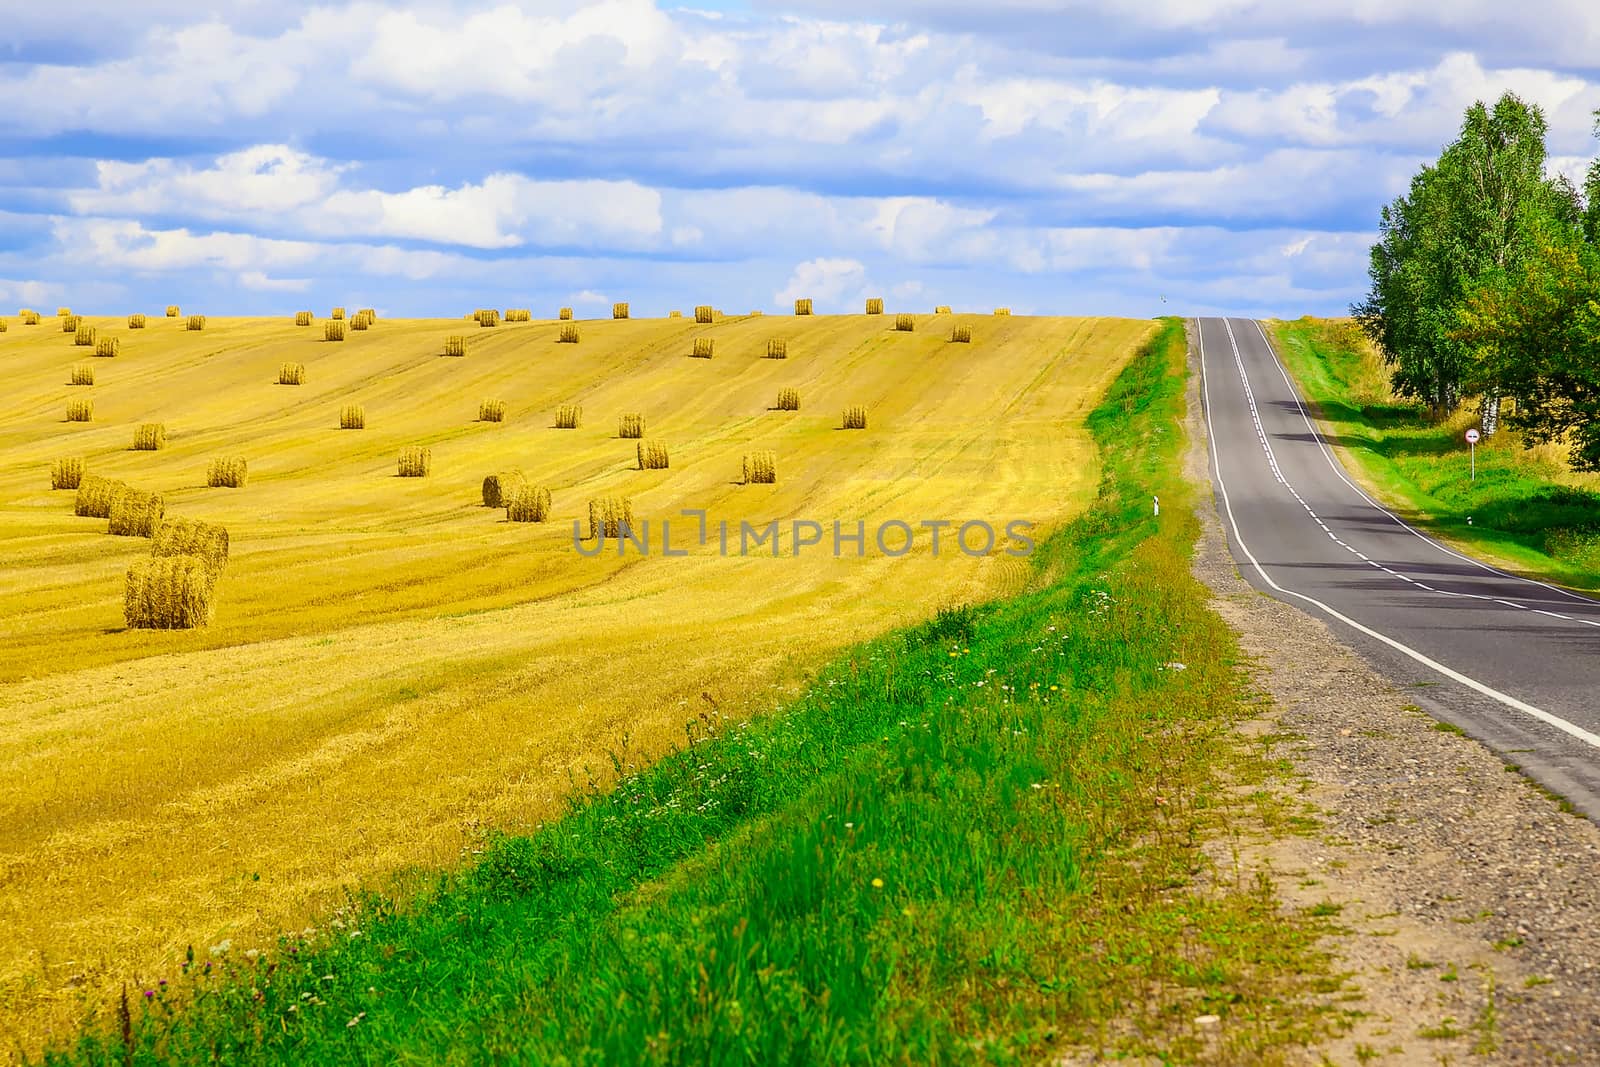 Round, Yellow Straw Bales in a  Field at end of Summer at Day with Blue Sky, Clouds after Harvest near Road